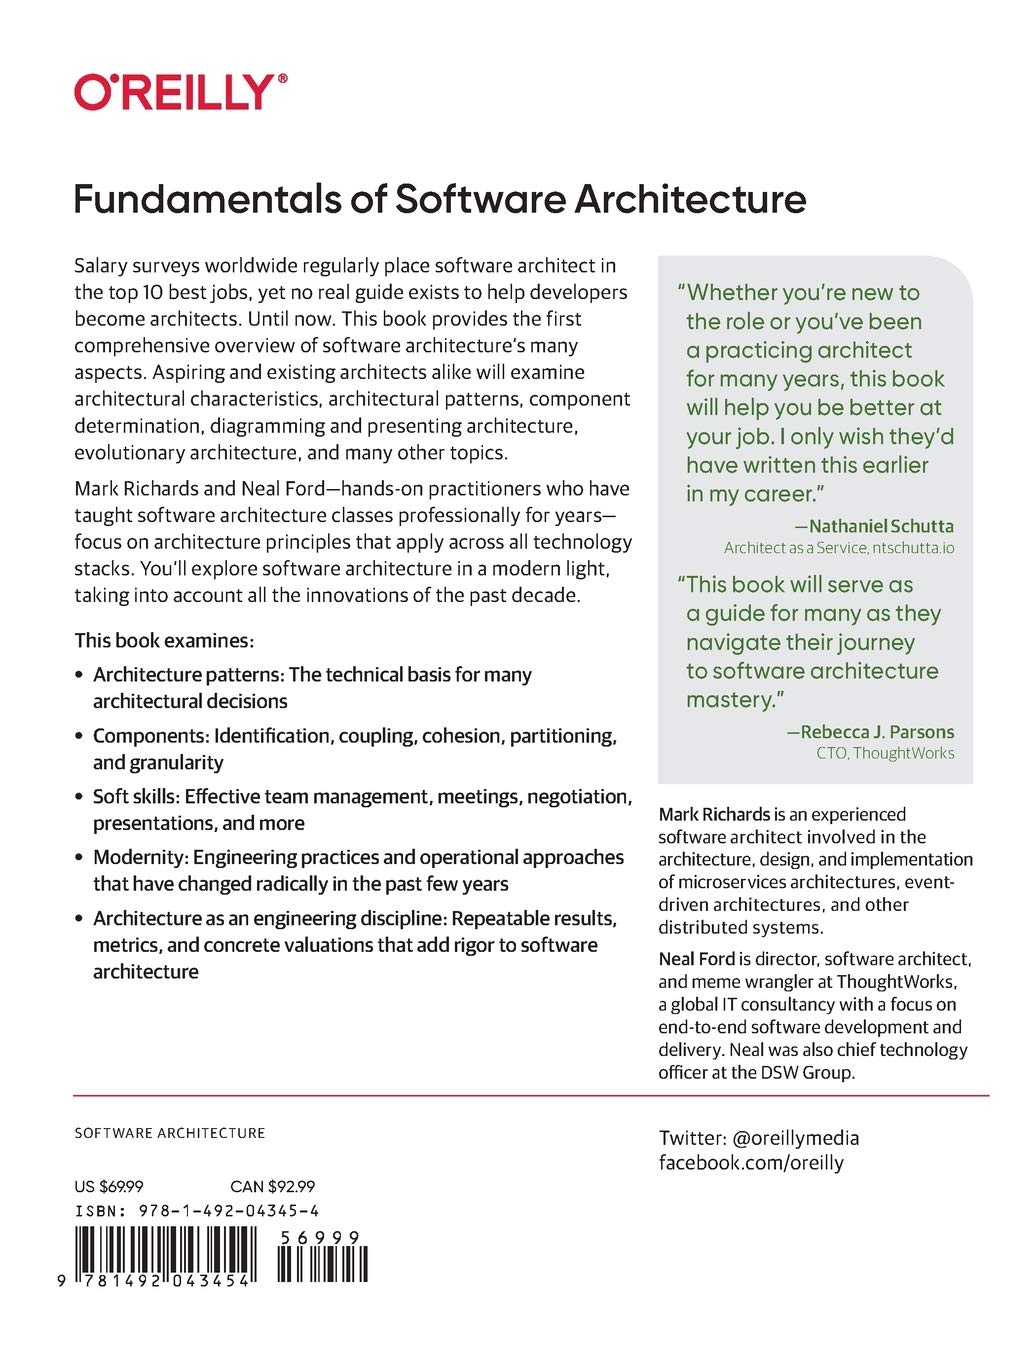 Fundamentals of Software Architecture by Mark Richards